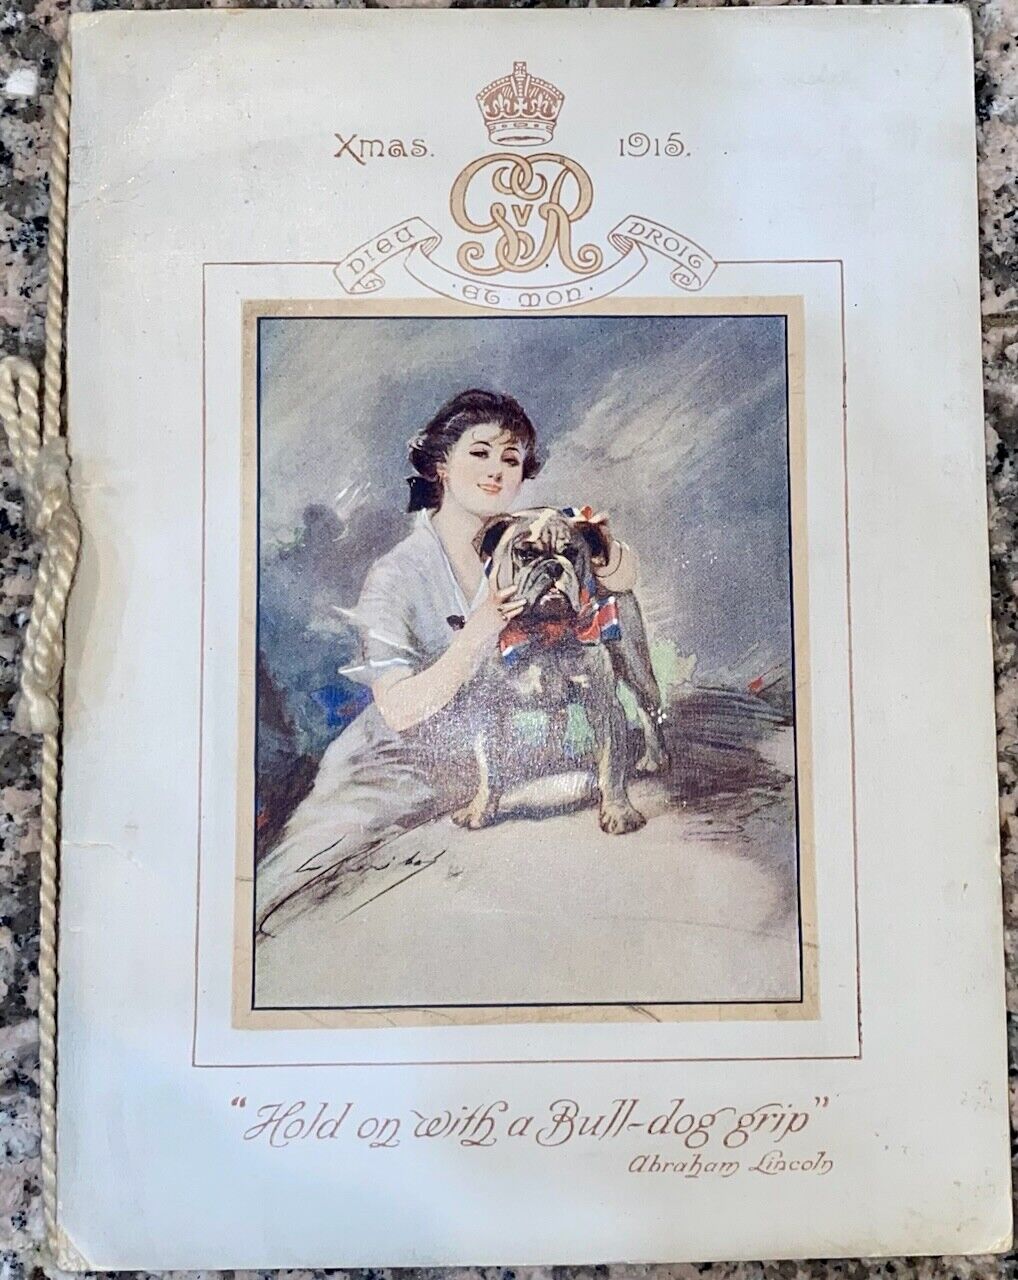 1915 Royal Christmas card from Nottingham. 